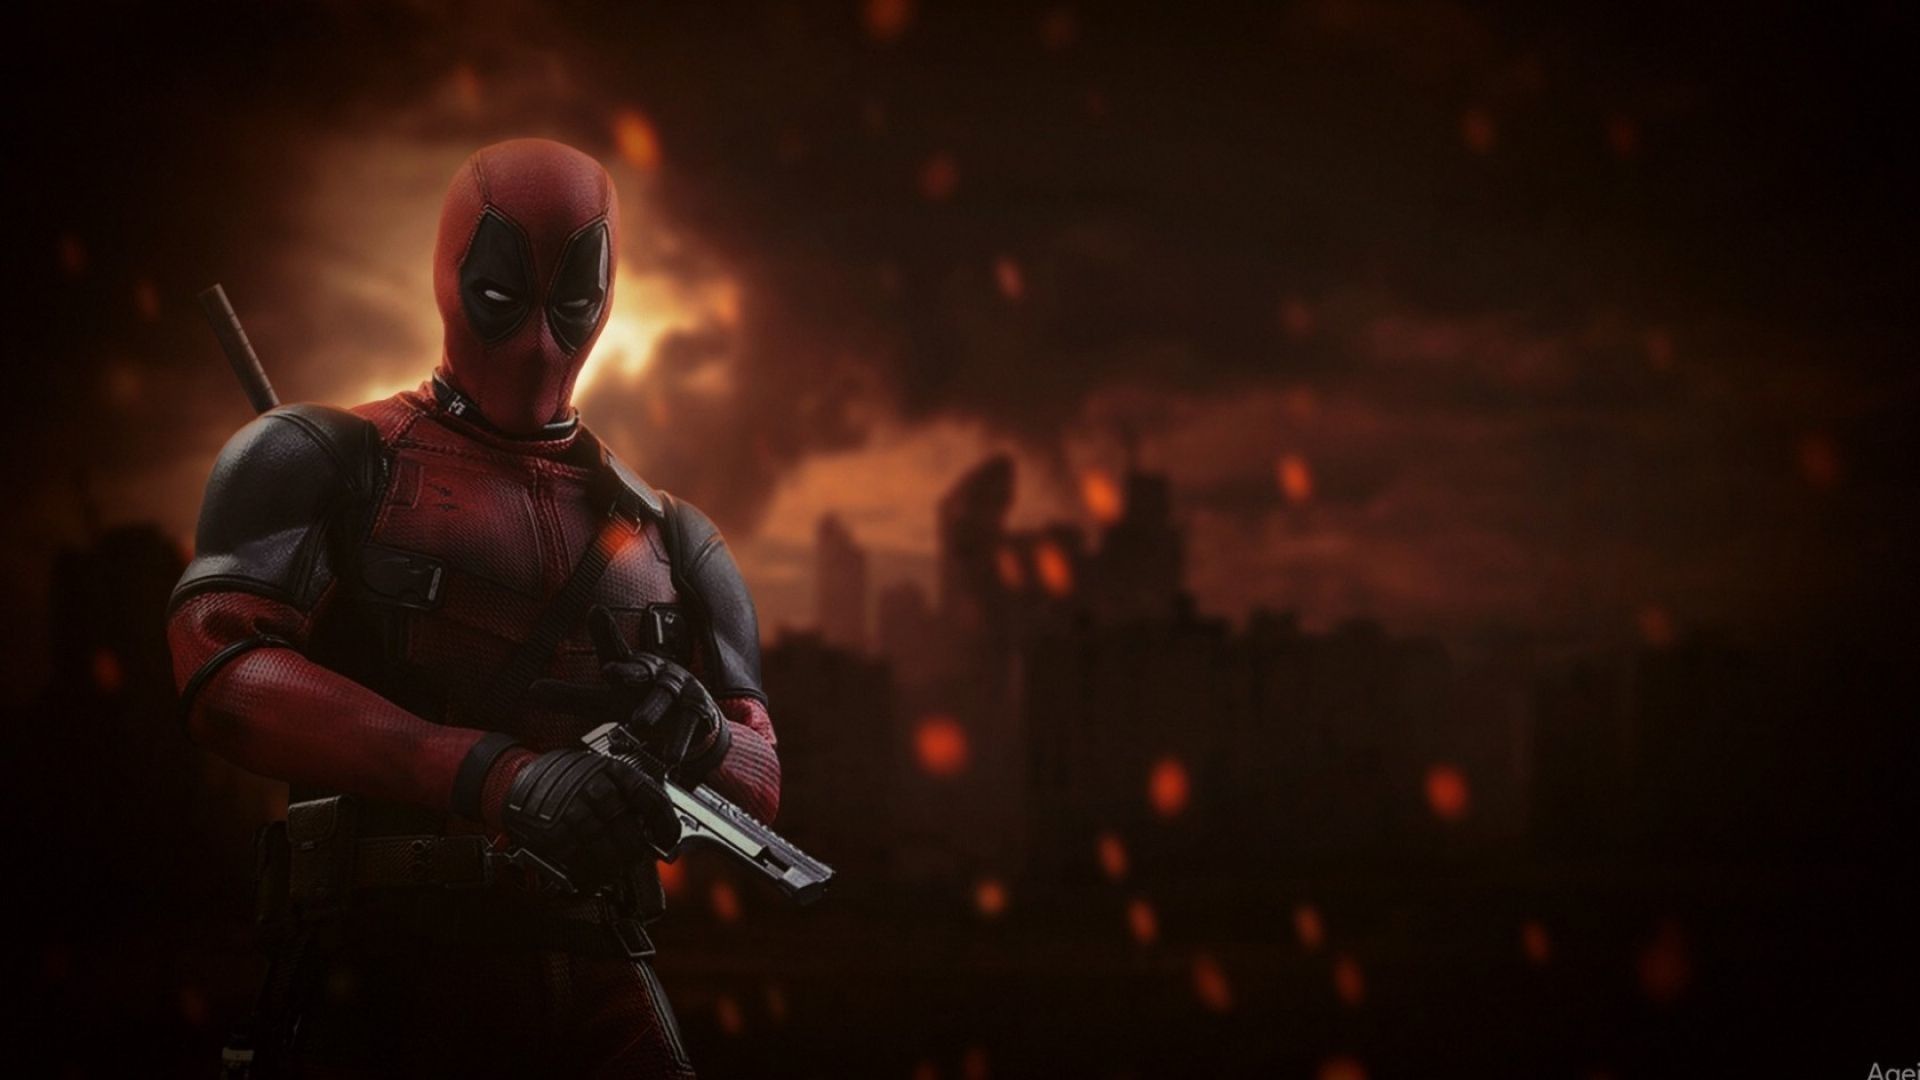 Deadpool DesktopHut - Live Wallpapers and Animated Wallpapers 4K/HD